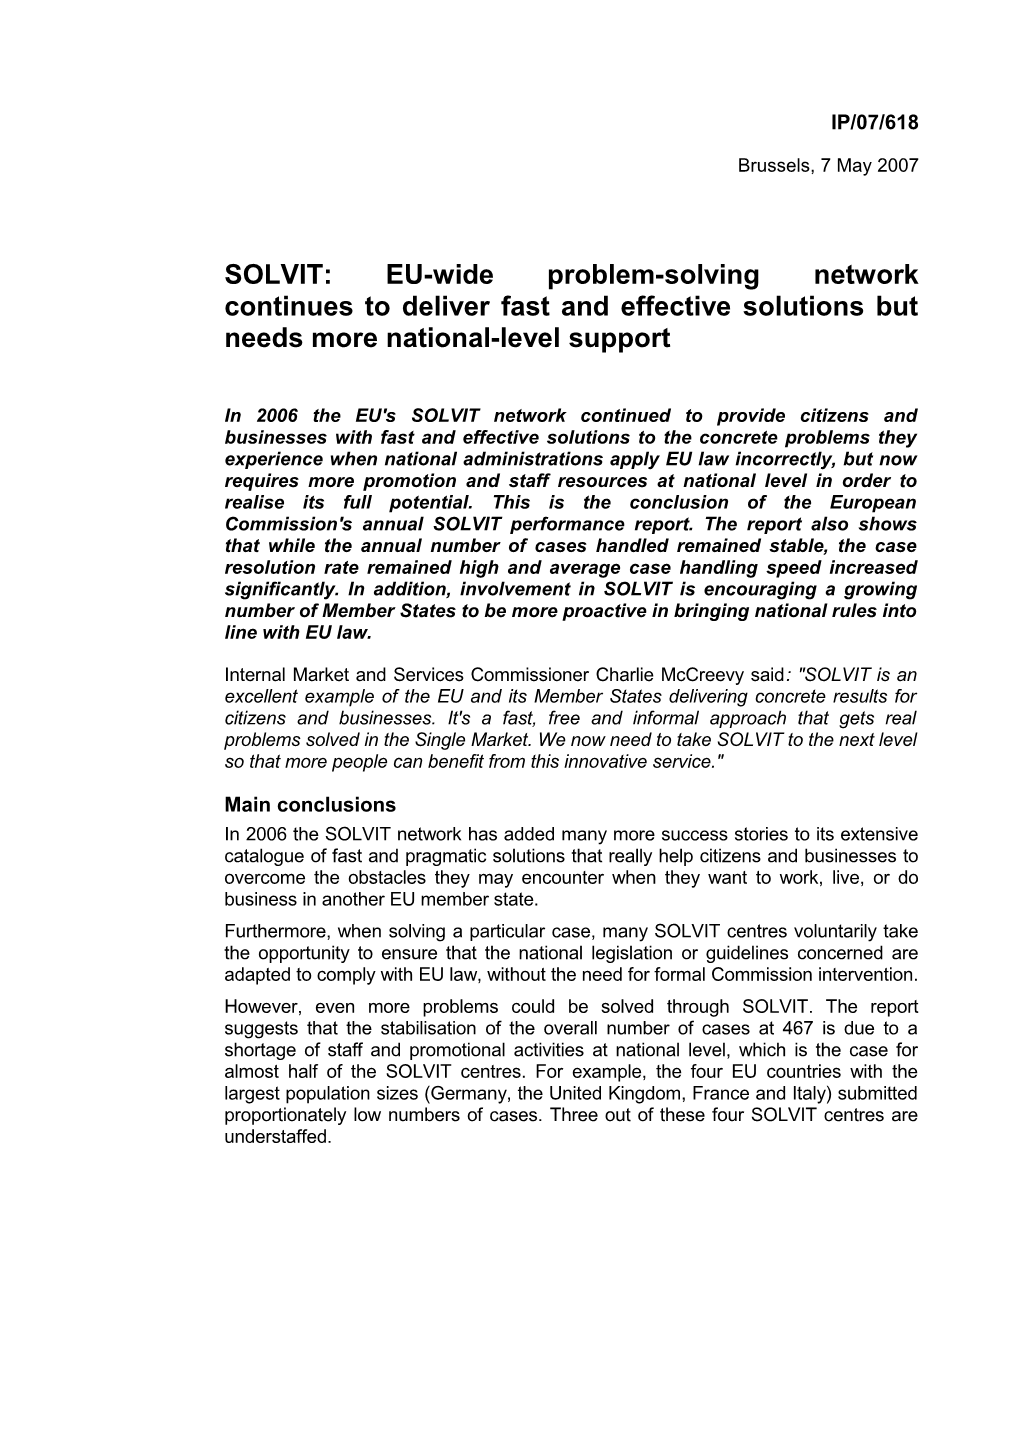 SOLVIT: EU-Wide Problem-Solving Networkcontinues Todeliver Fast and Effective Solutions